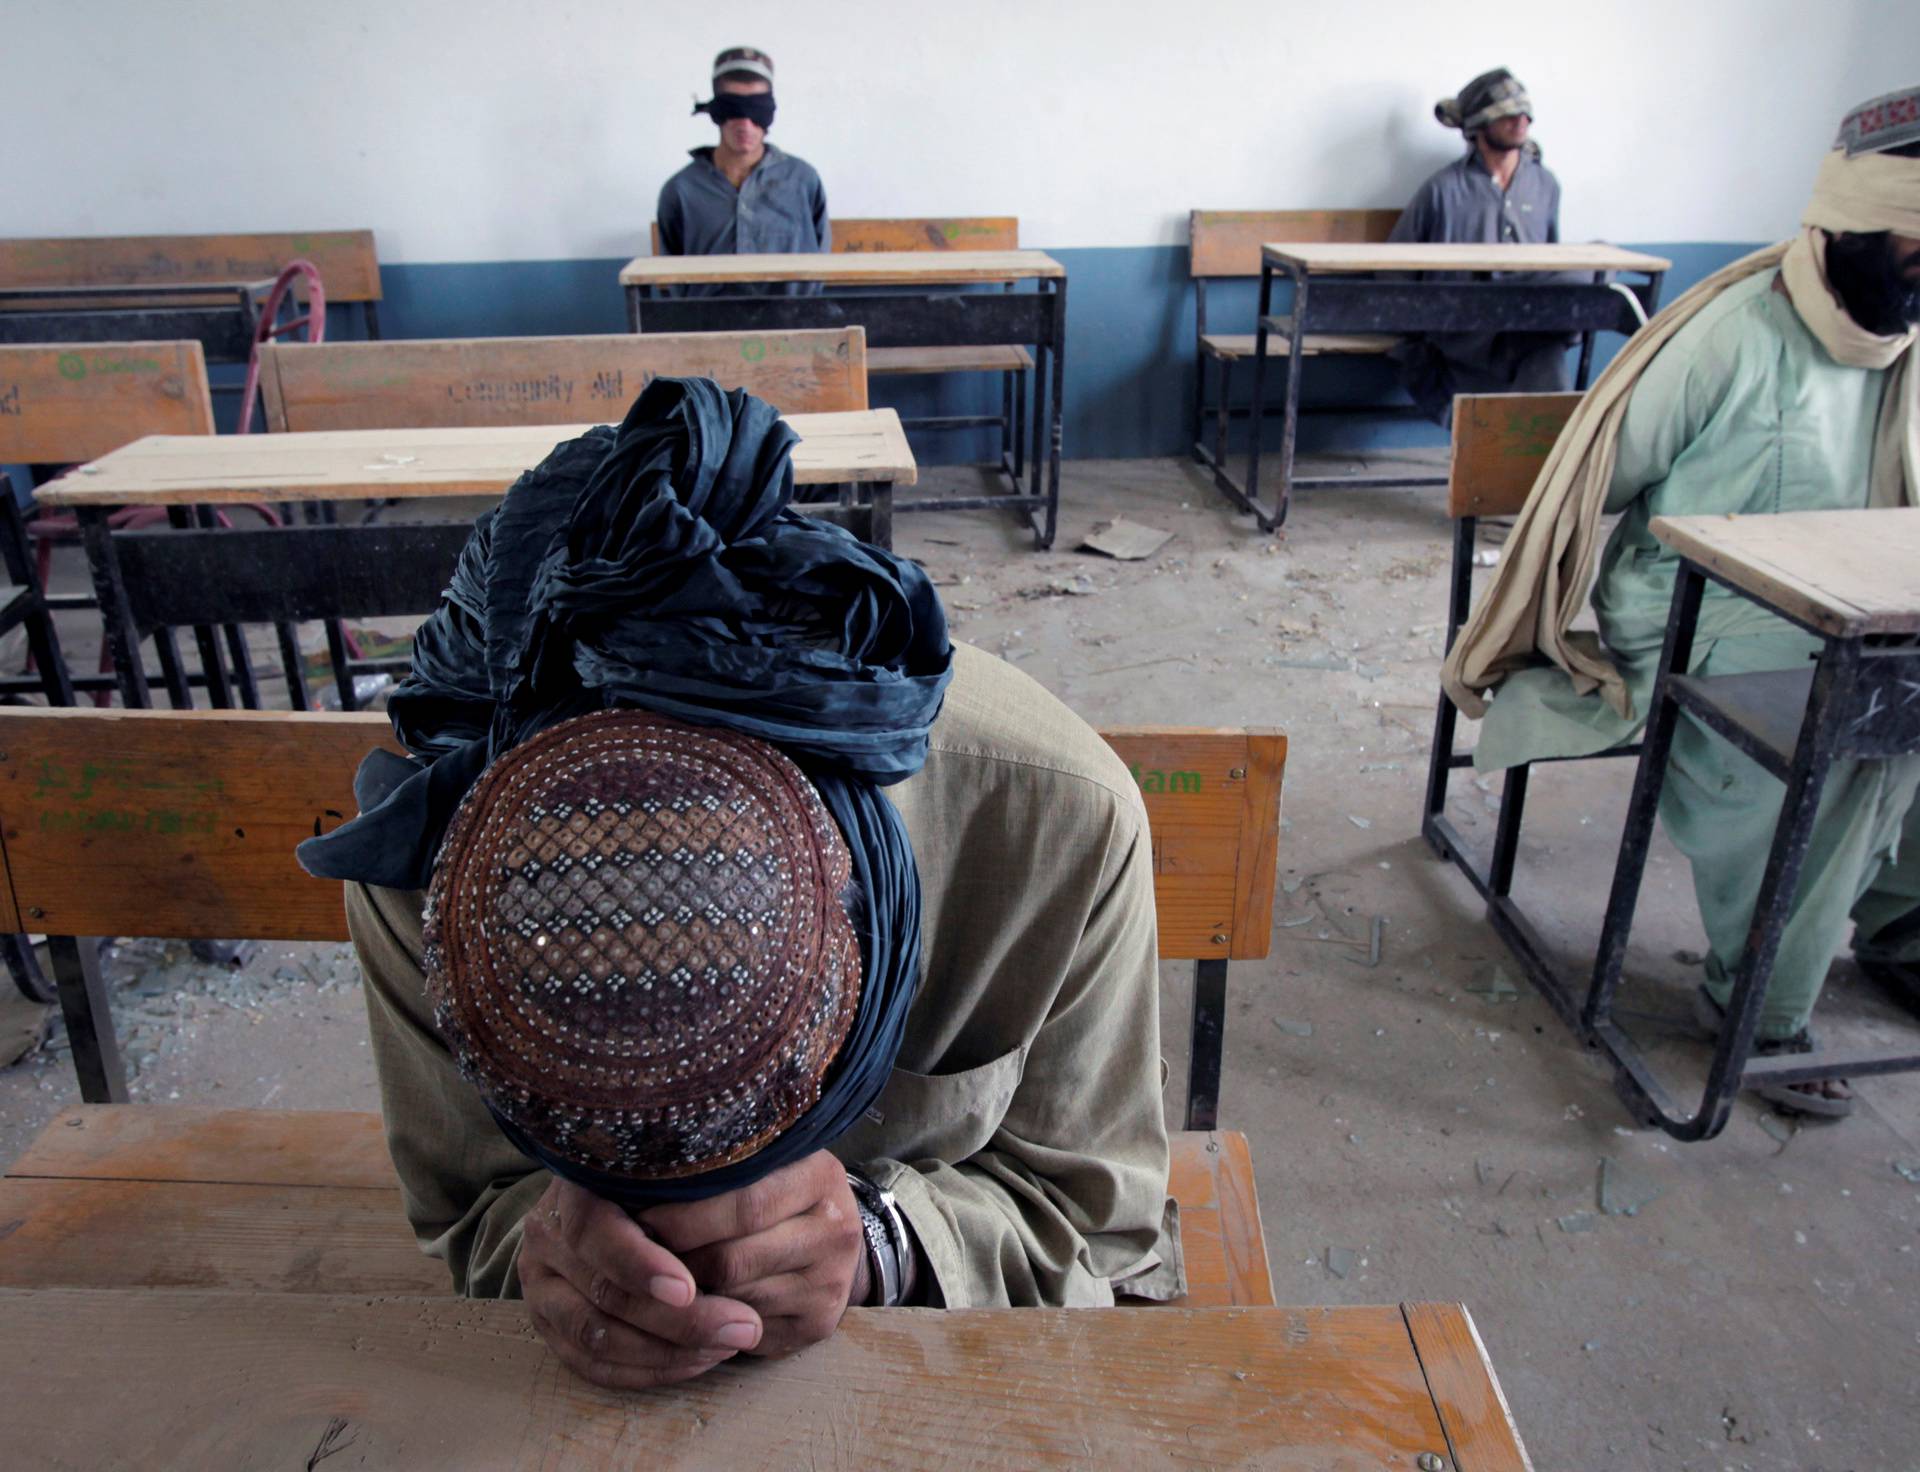 FILE PHOTO: A group of men detained for suspected Taliban activities are held for questioning at a schoolhouse in the village of Kuhak